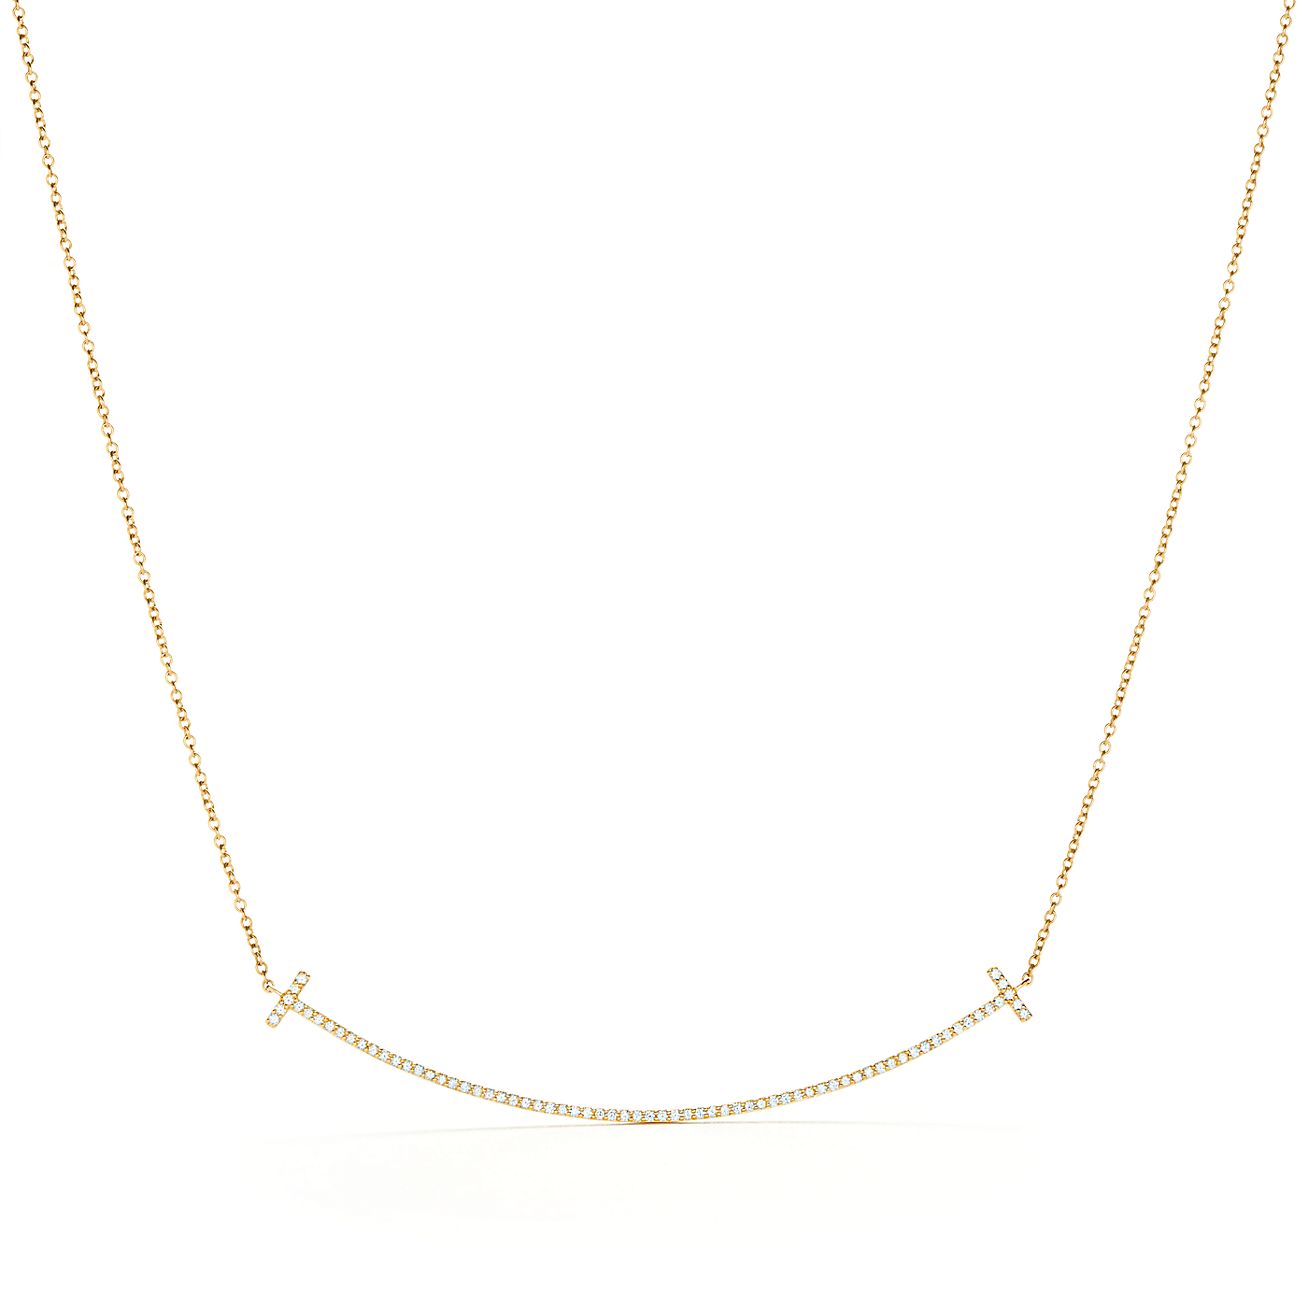 TIFFANY & CO. Smile T Adjustable 16-18” Pendant Necklace in Silver, Boxed  £247.99 - PicClick UK